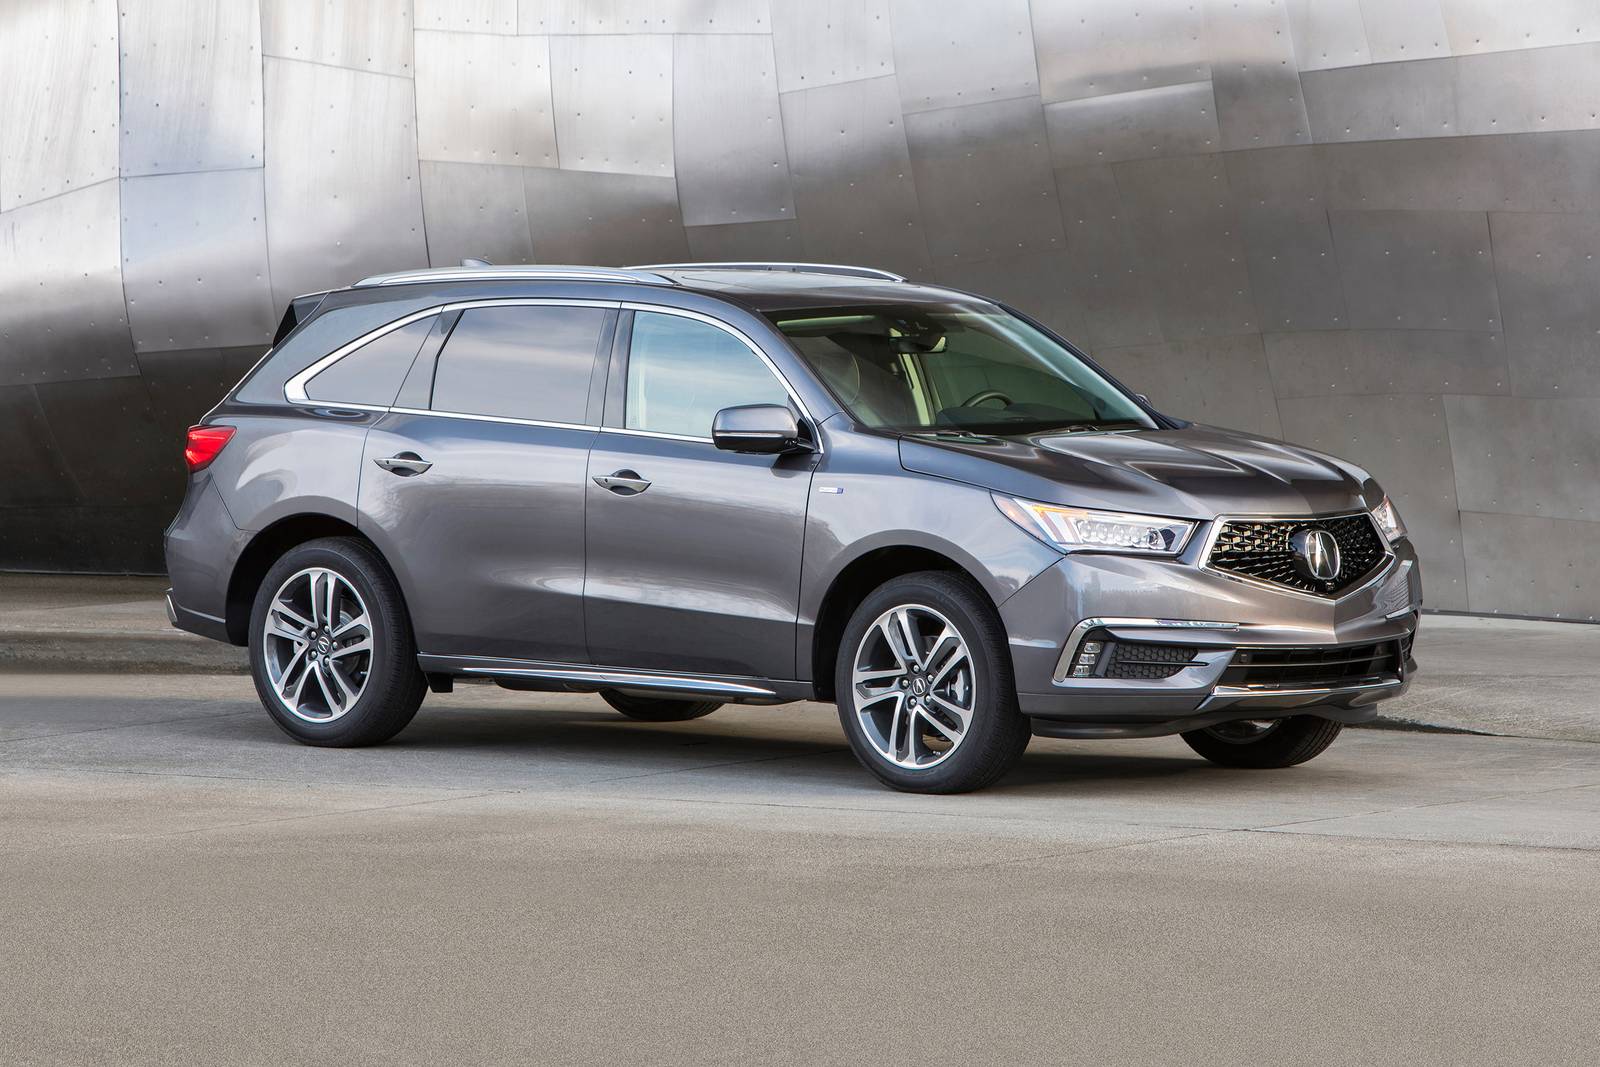 Used 2019 Acura MDX Hybrid Review | Edmunds